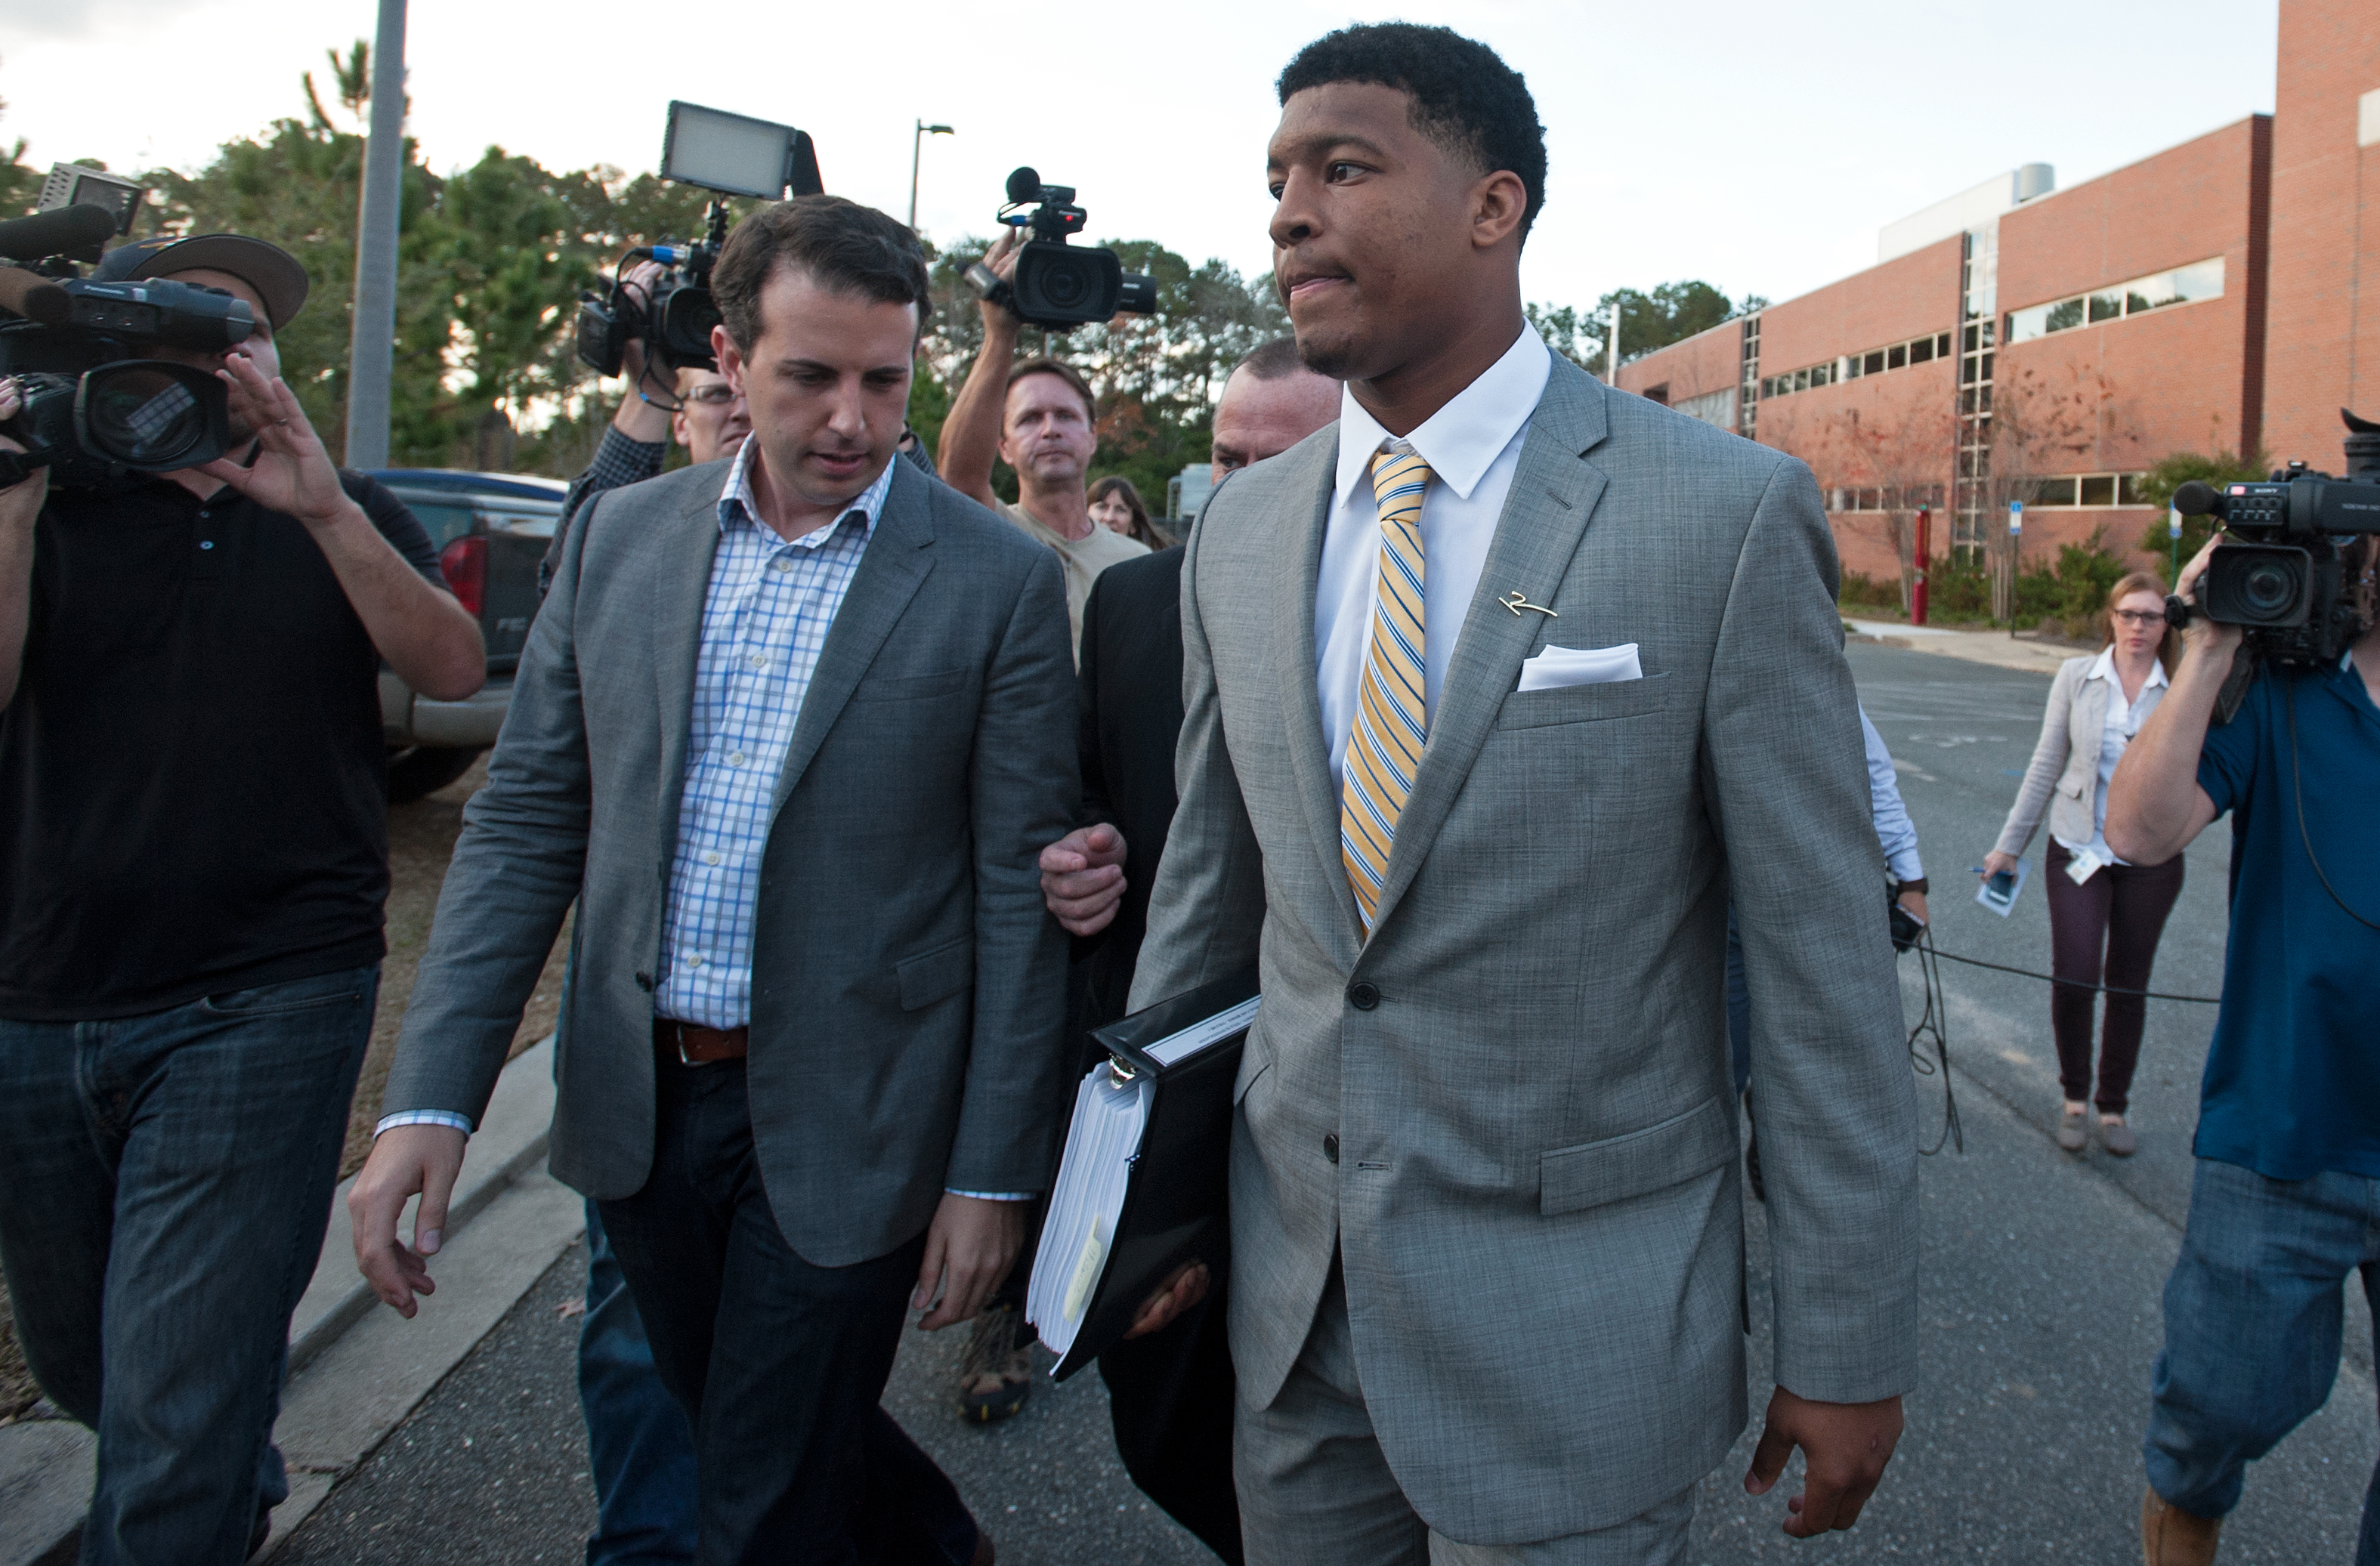 Florida State Seminoles quaterback Jameis Winston leaves his student conduct code hearing in Tallahassee, Florida on Dec. 2, 2014. (Jeff Gammons—Getty Images)